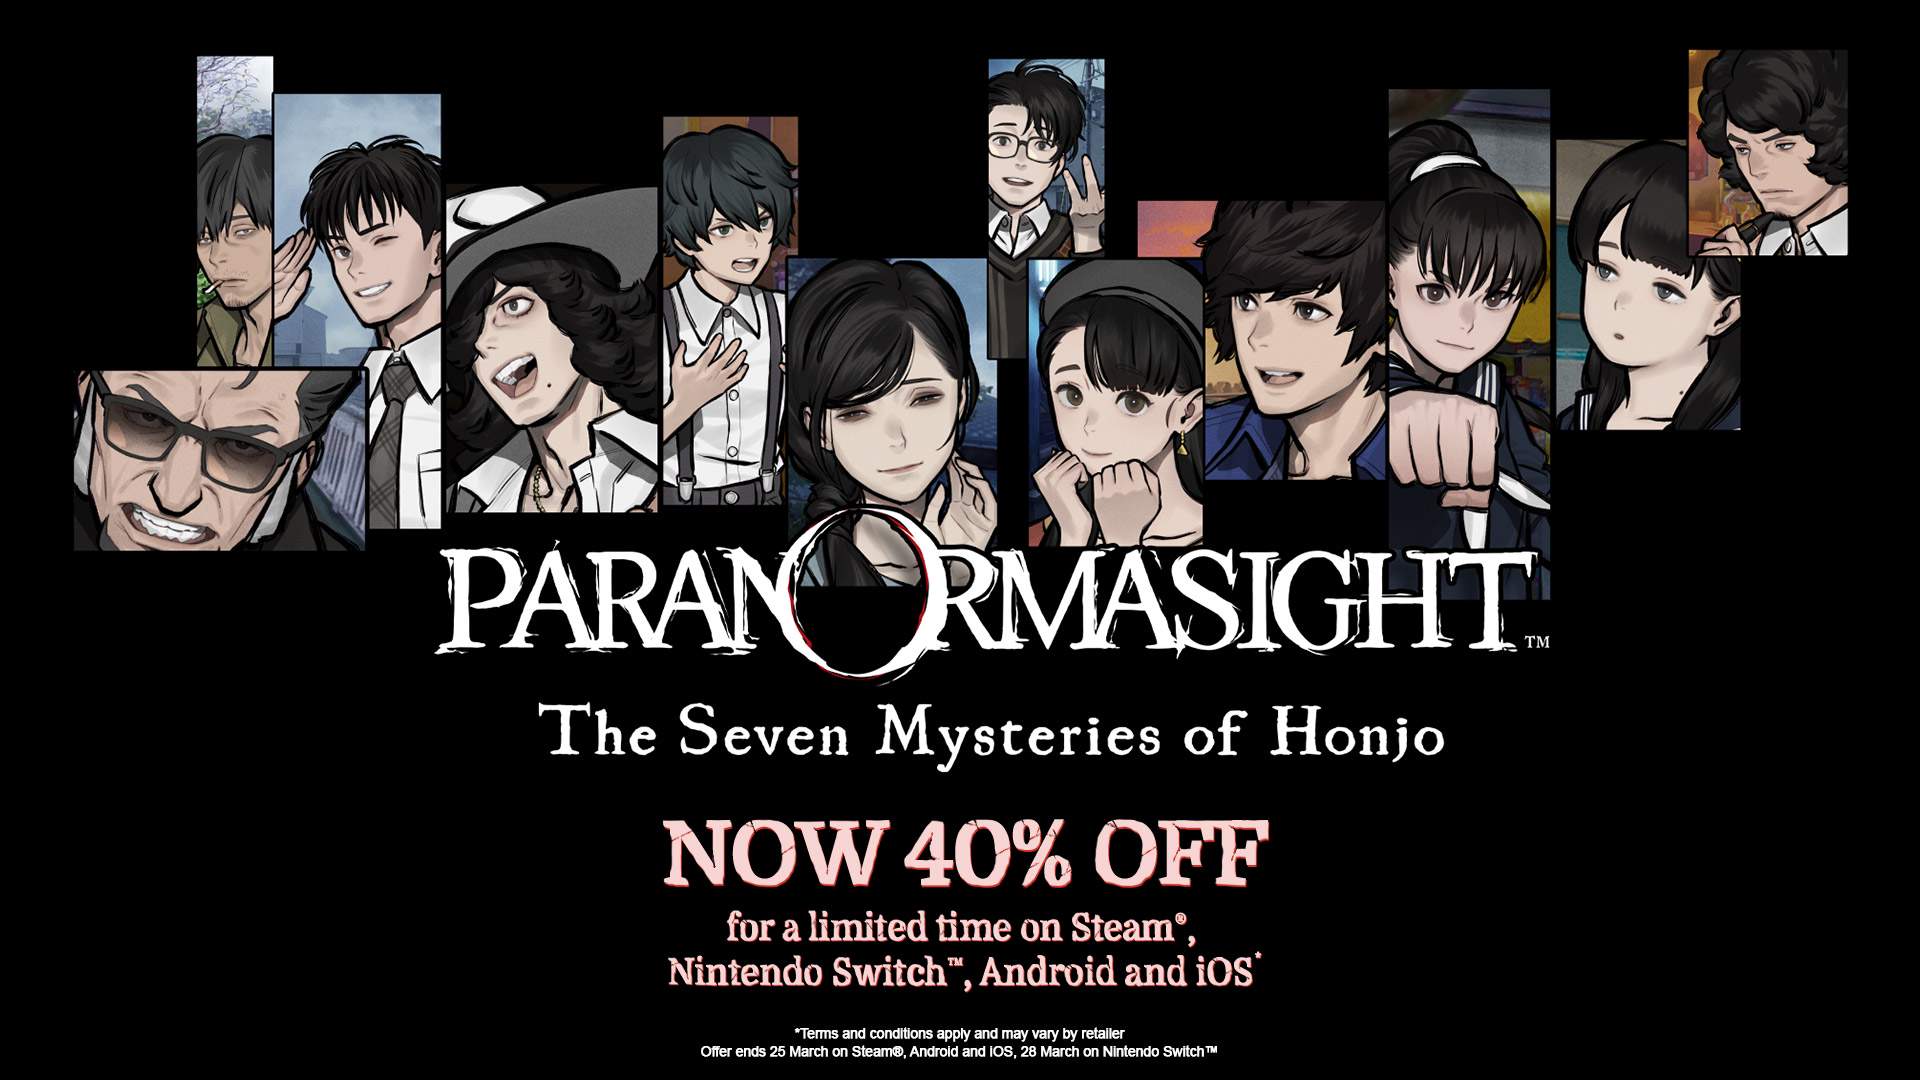 Multiple characters from PARANORMASIGHT with 40% off messaging below